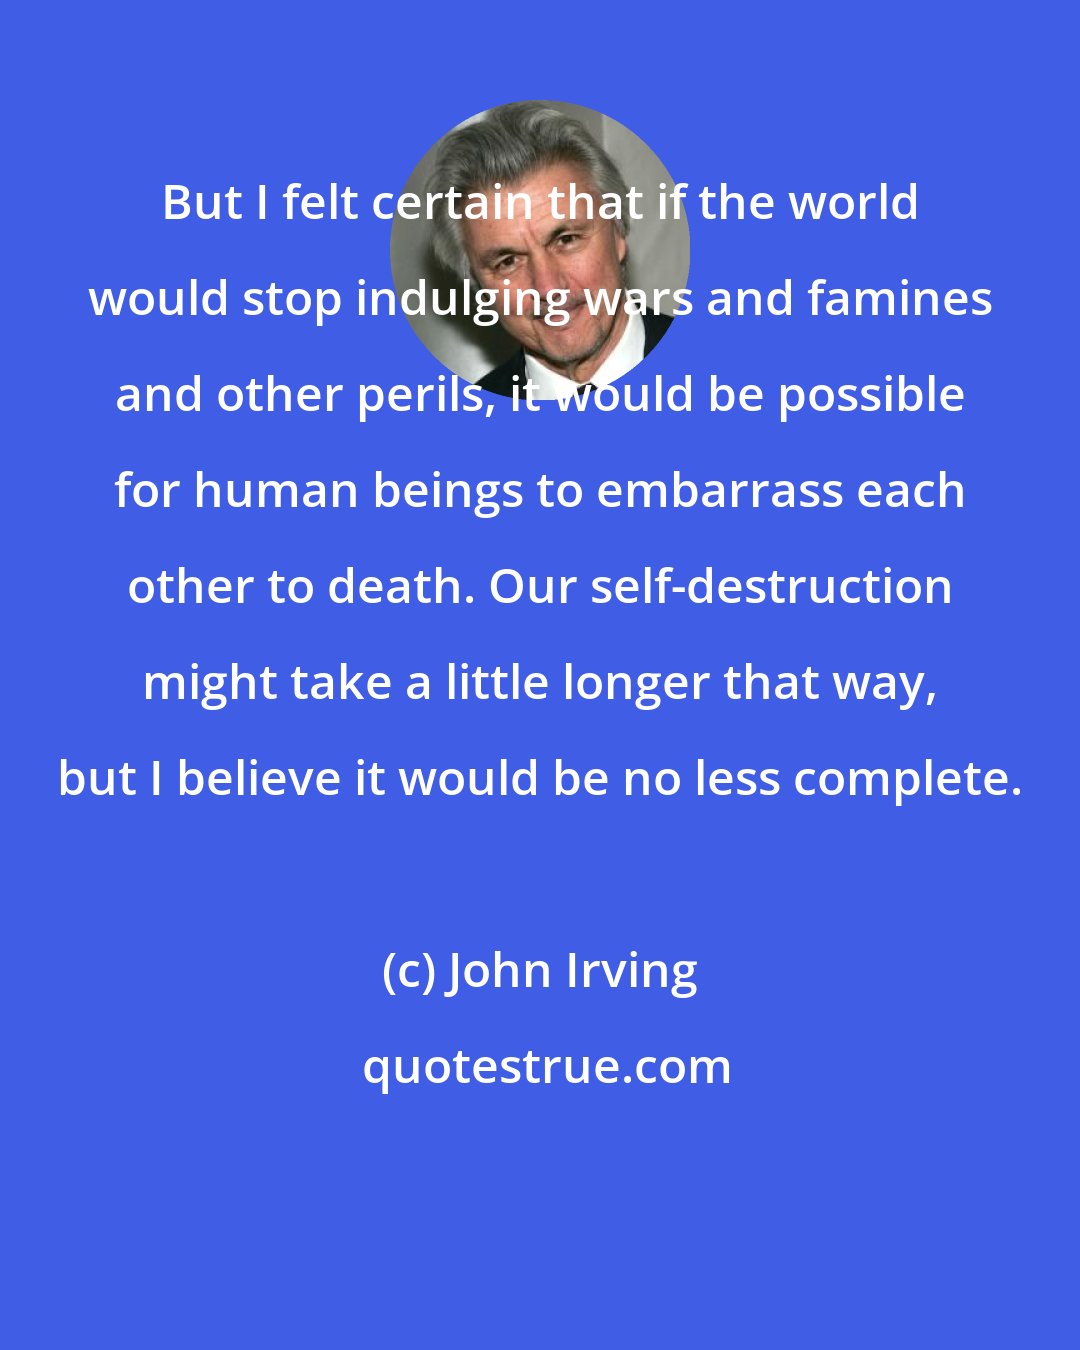 John Irving: But I felt certain that if the world would stop indulging wars and famines and other perils, it would be possible for human beings to embarrass each other to death. Our self-destruction might take a little longer that way, but I believe it would be no less complete.